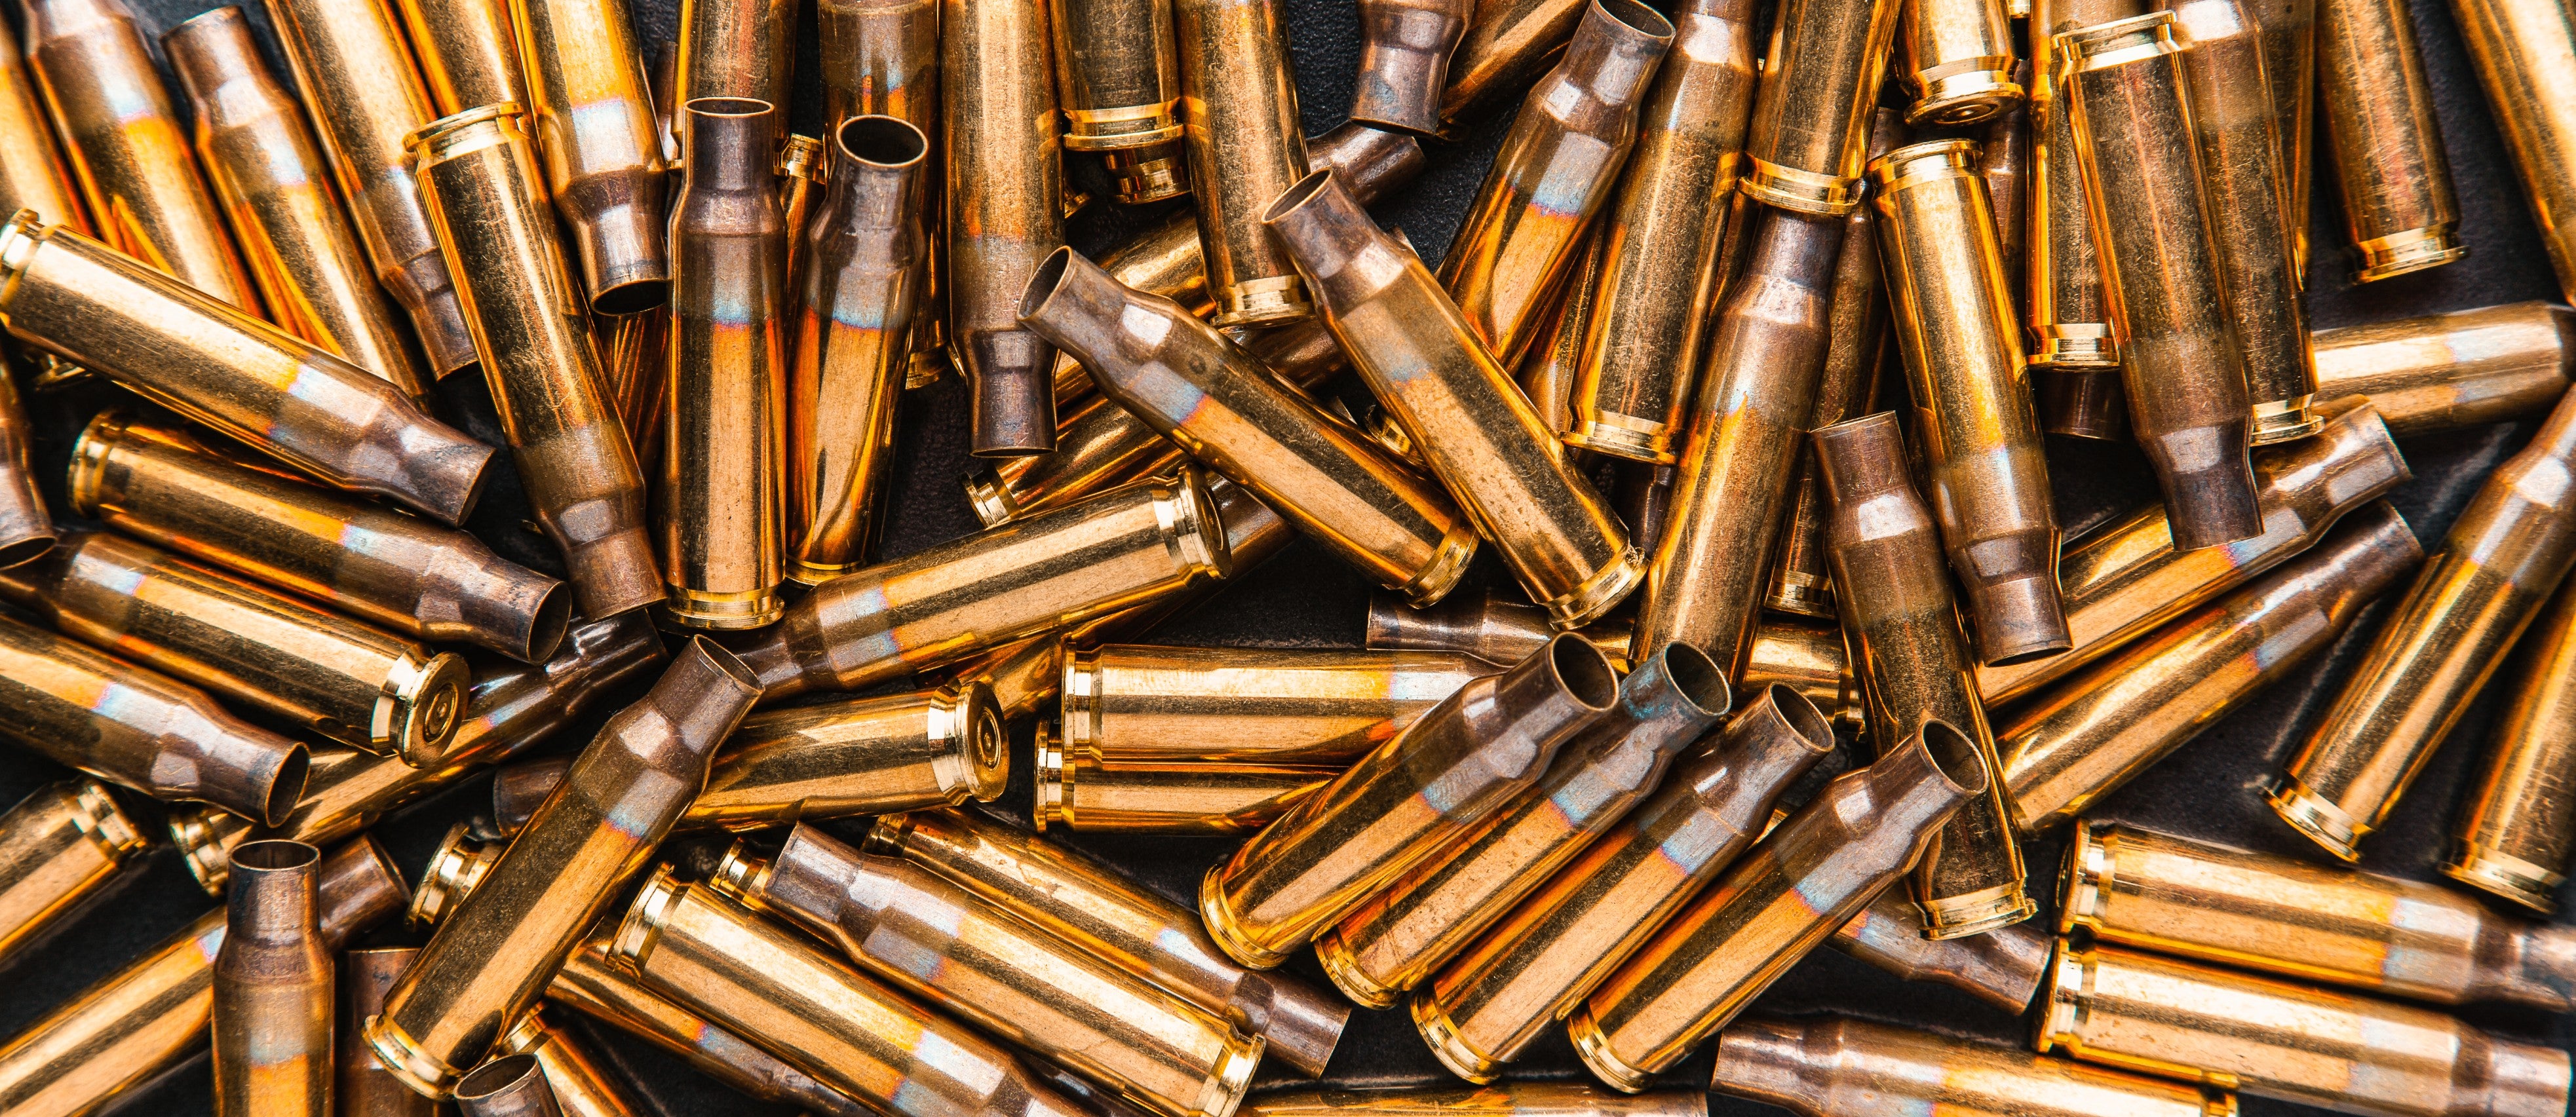 The Evolution of Brass Cartridge Cases: From Military Surplus to High-Quality Reloading Brass